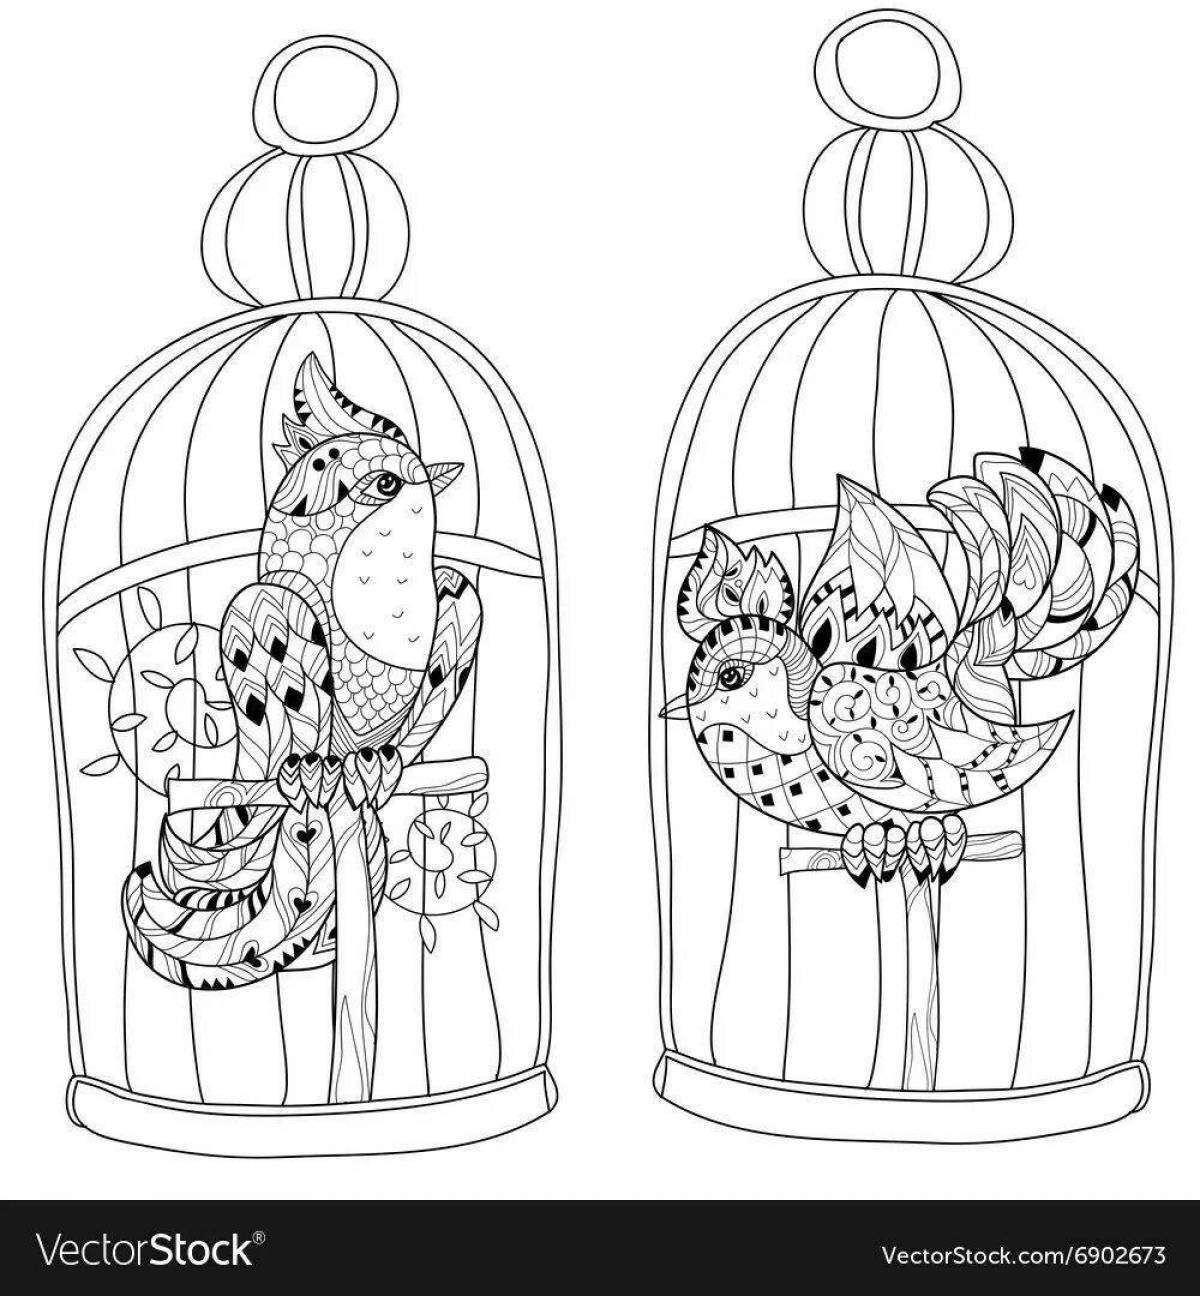 Caged parrot #5